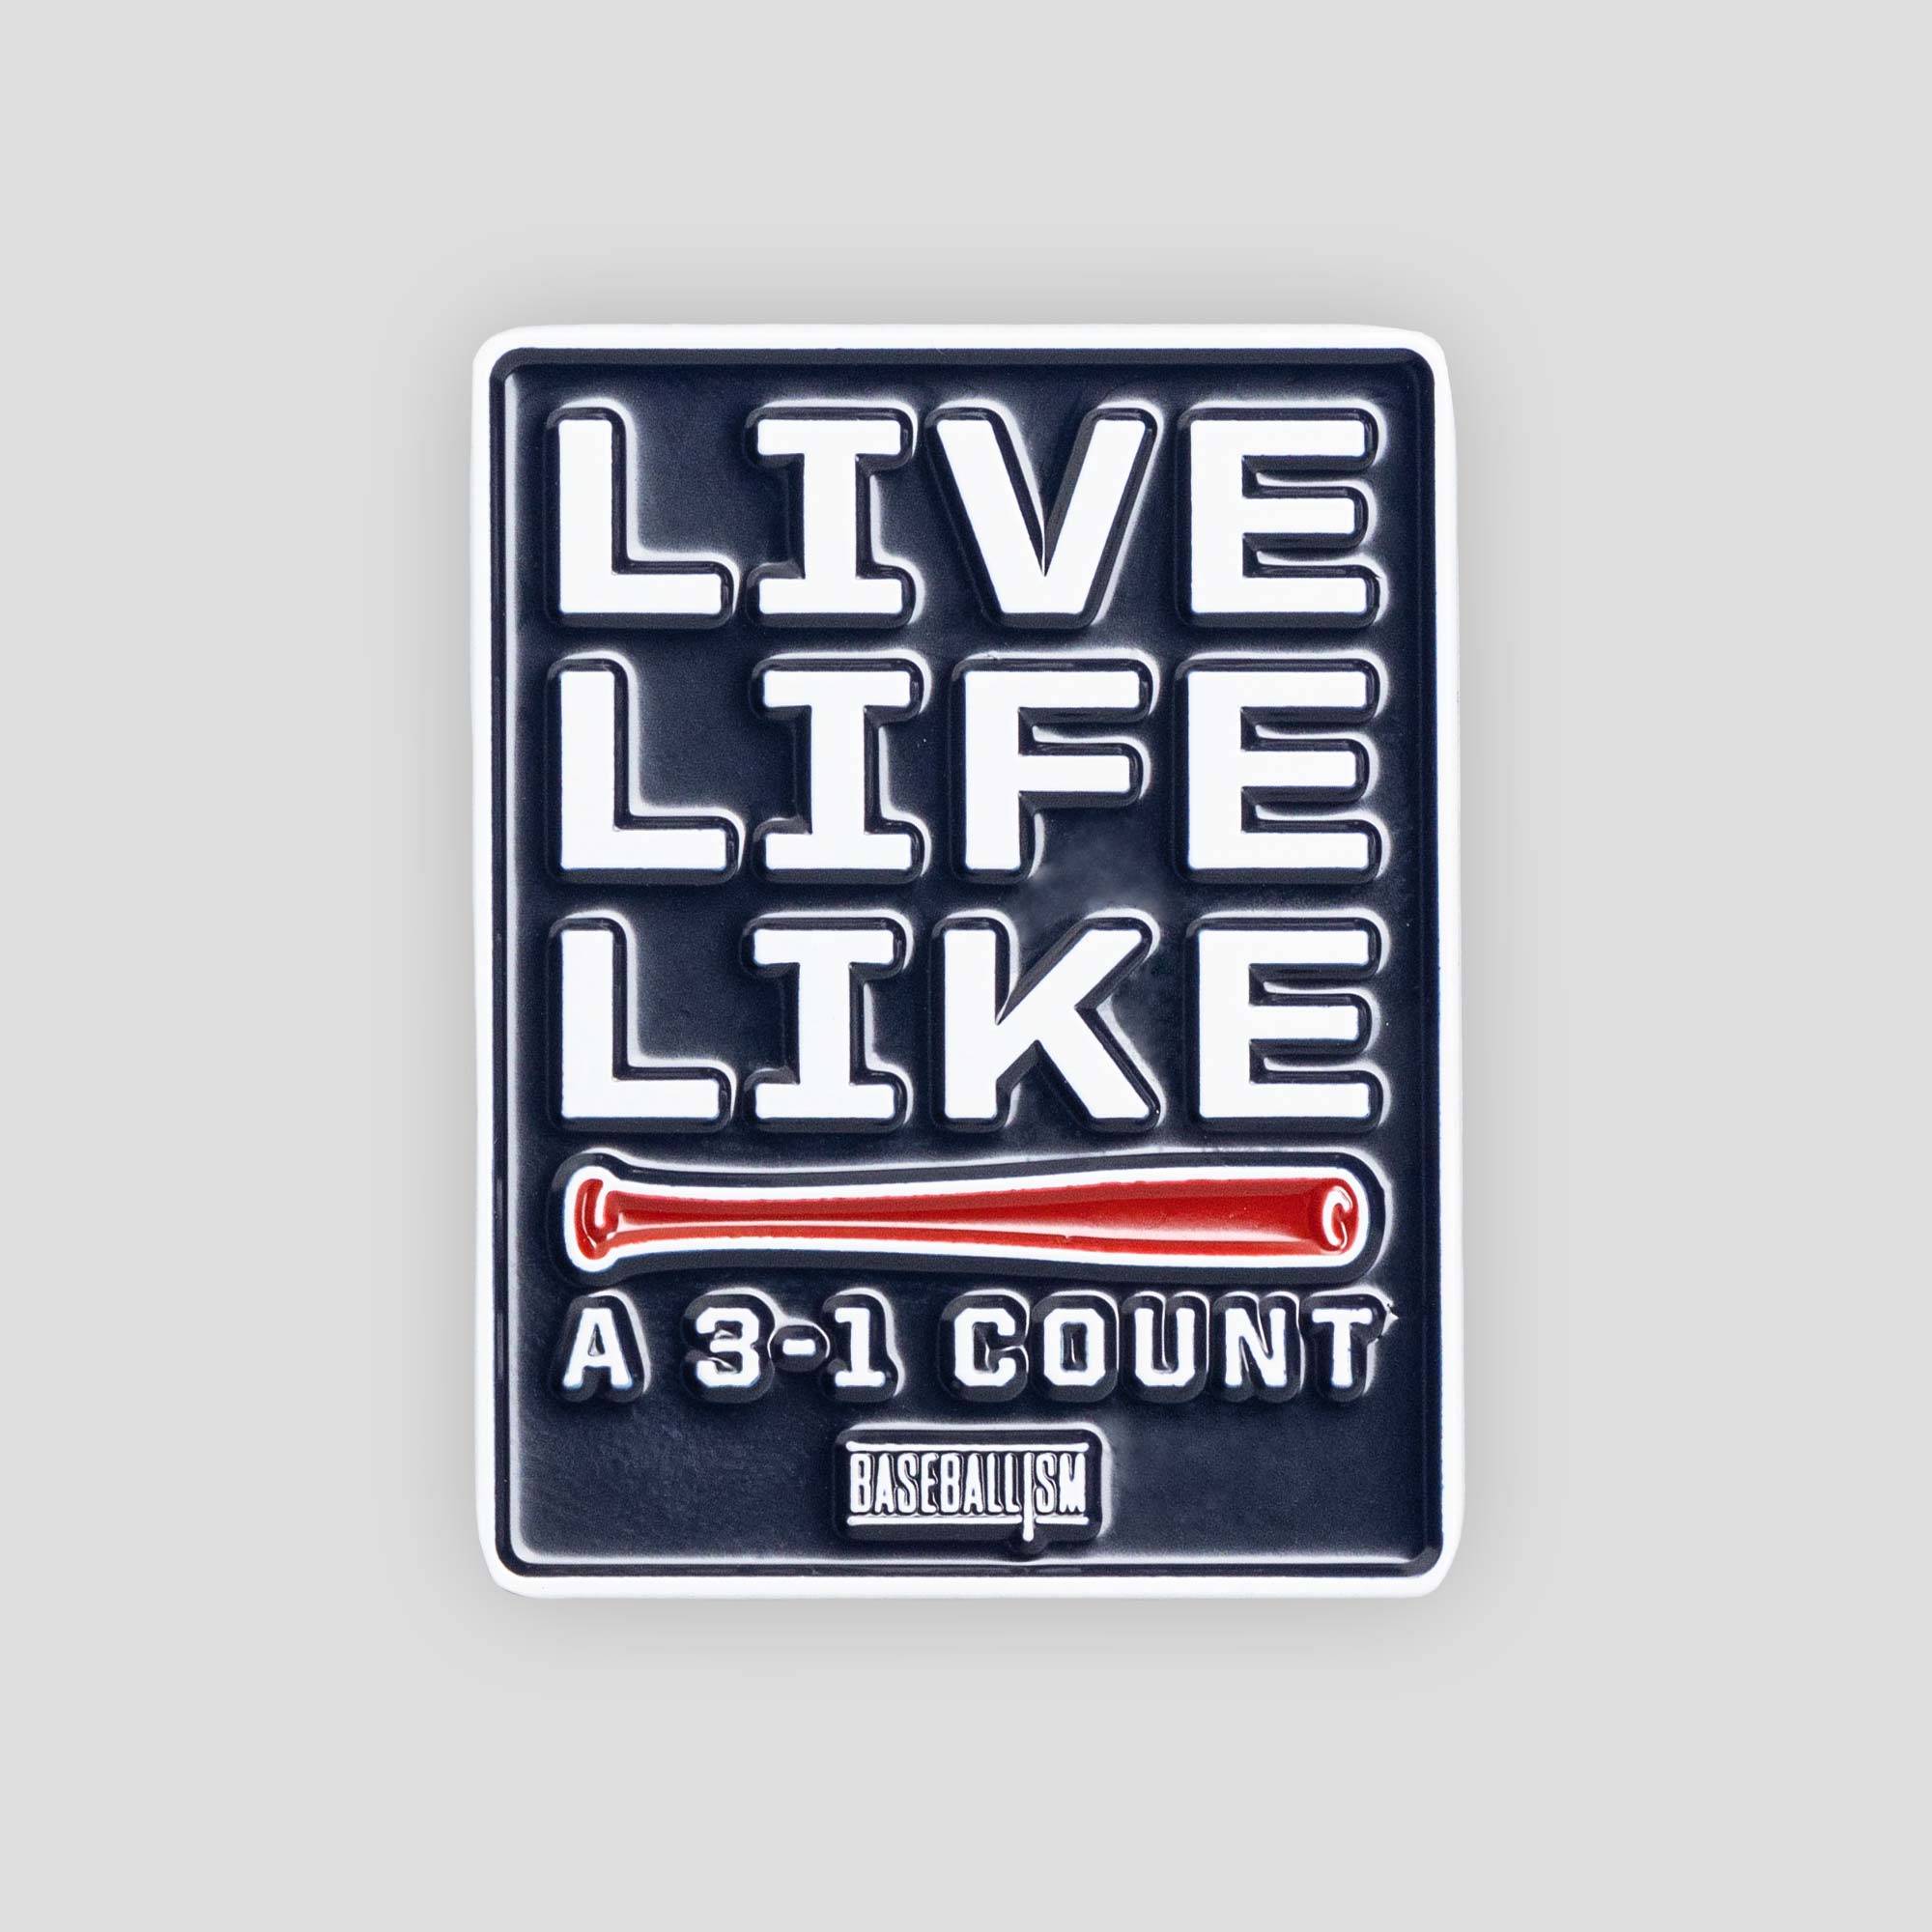 Baseballism - Live your life like a 3-1 count and look